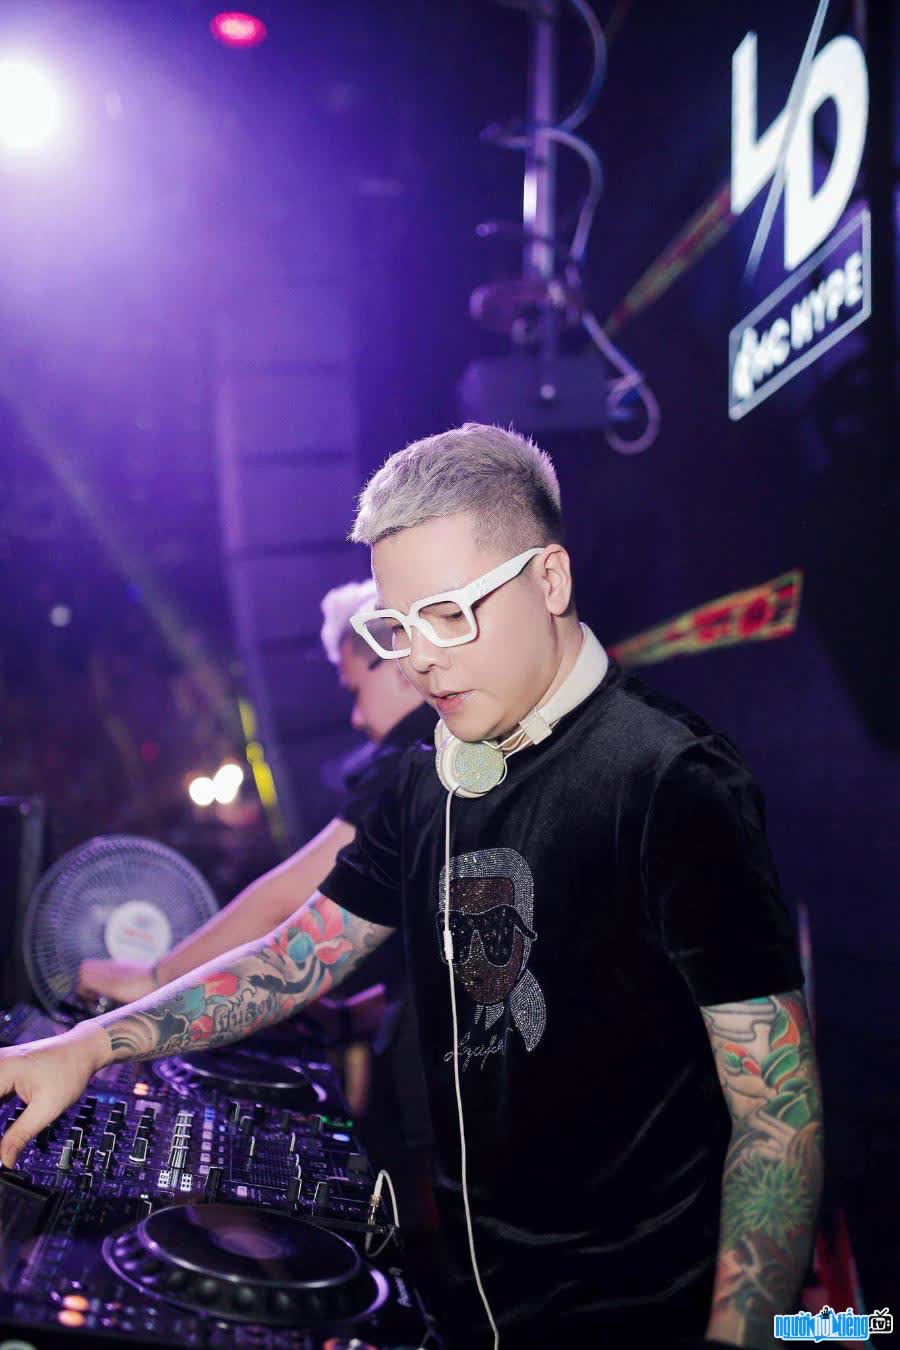 Vu Manh Duy came to the DJ profession by chance. At first